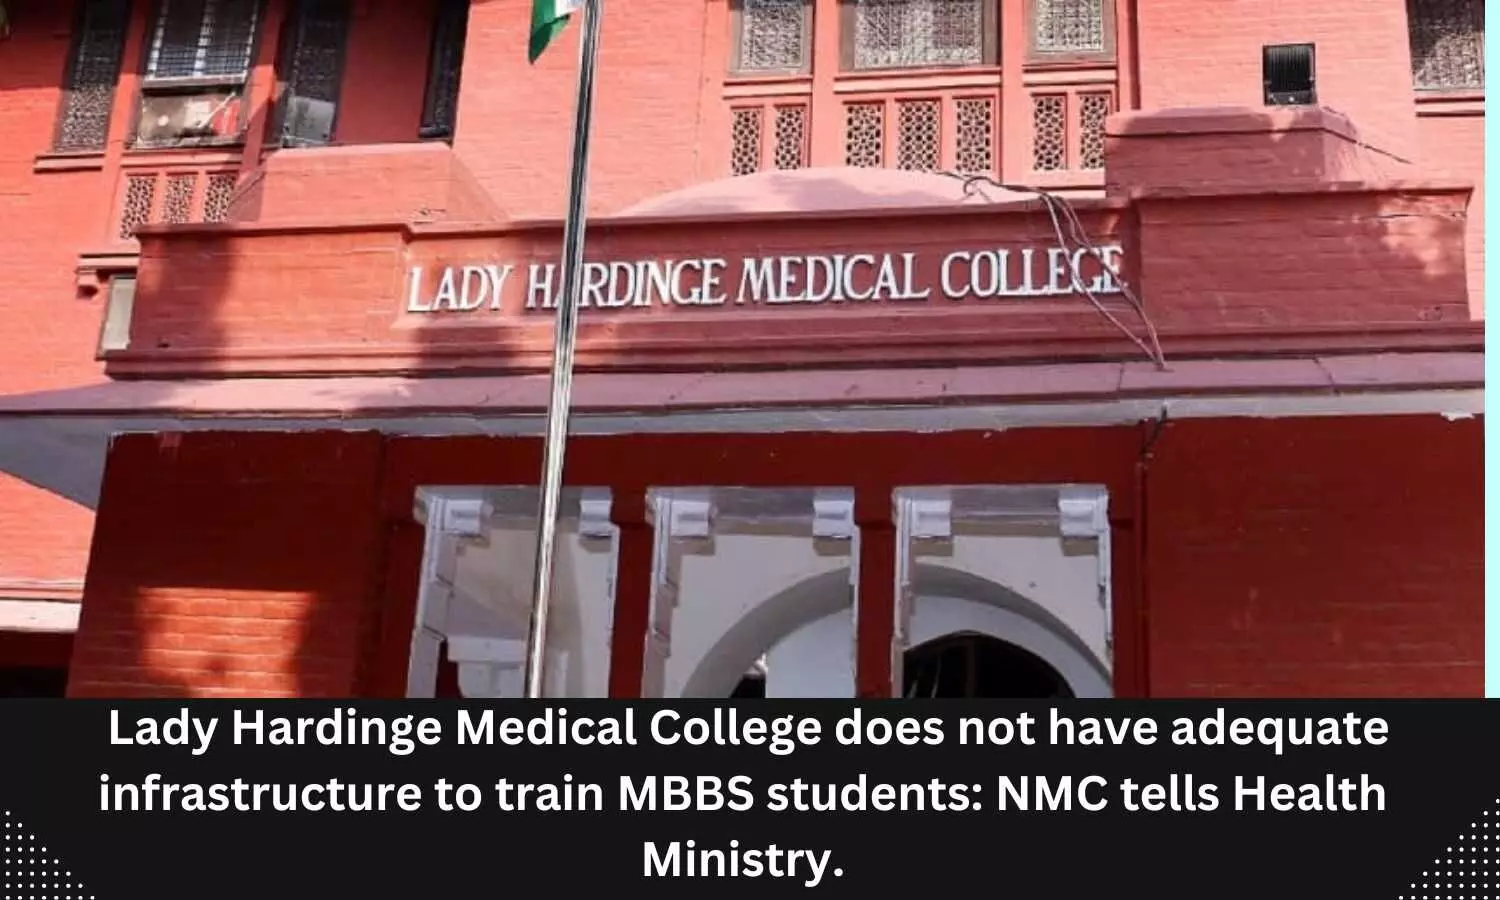 NMC tells Health Ministry about infrastructure issues at Lady Hardinge for MBBS training